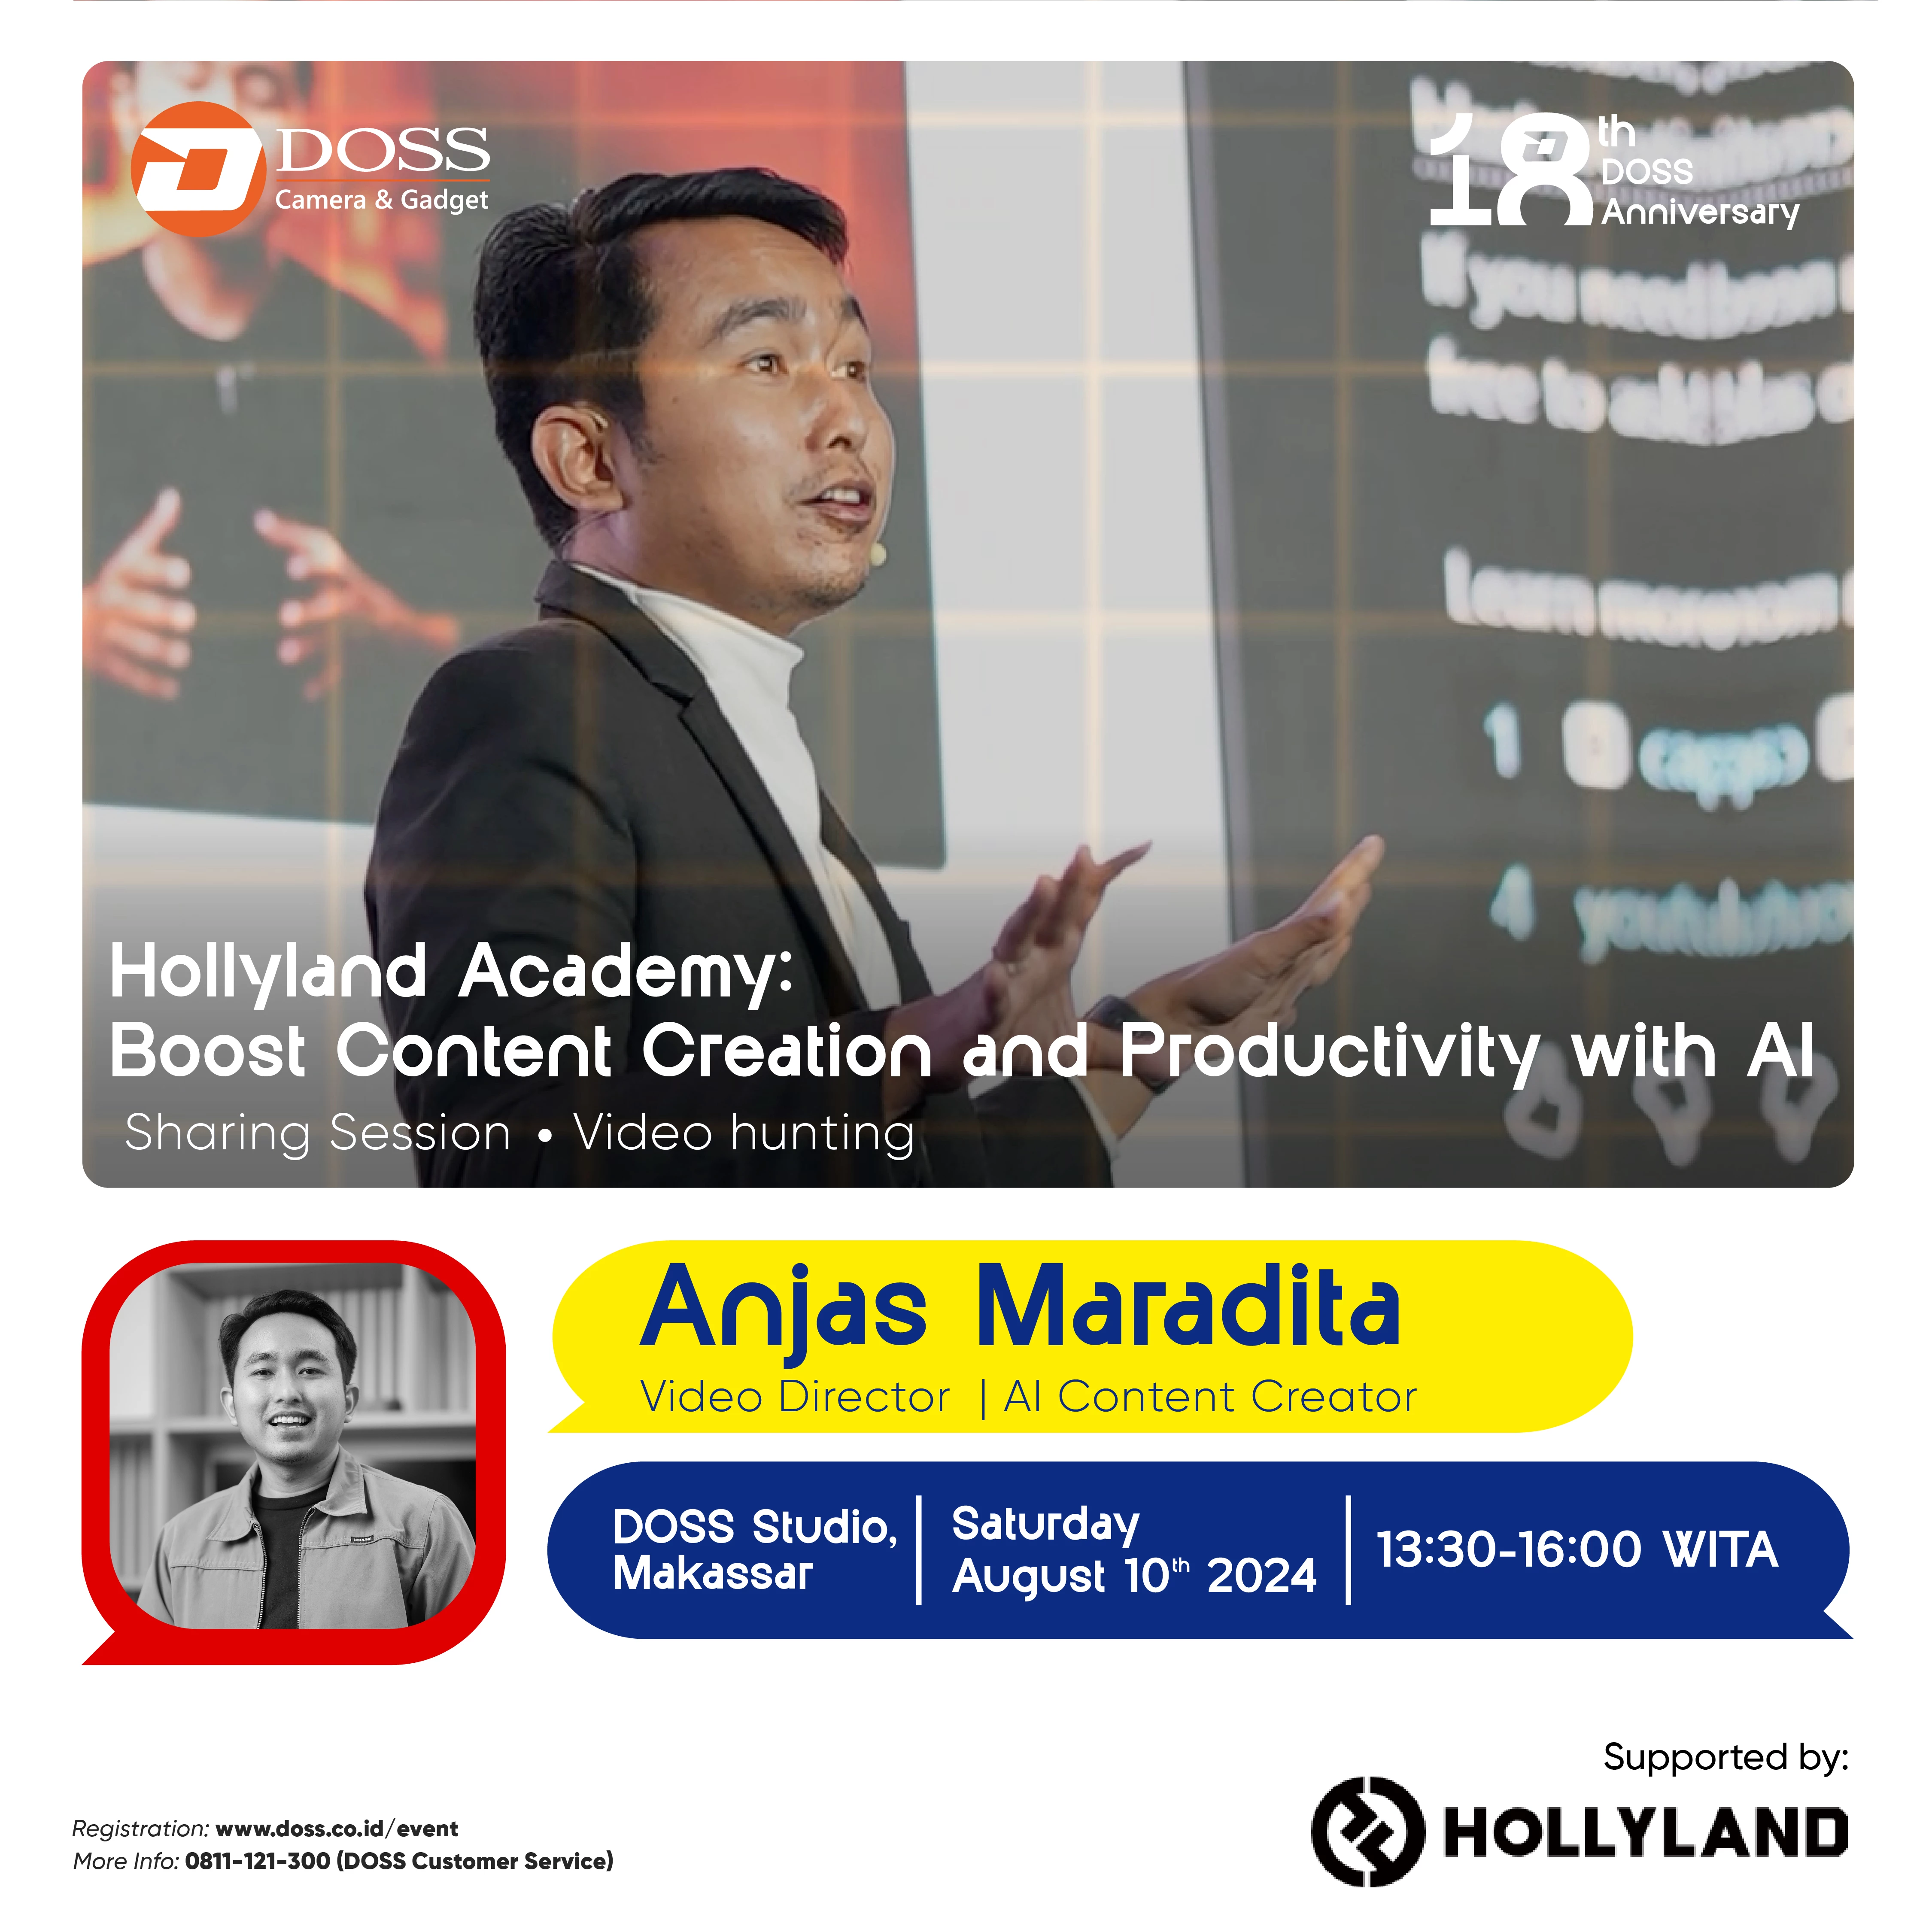 MKS - Content Creator: "Hollyland Academy : Boost Content Creation and ProductivitywithAI"